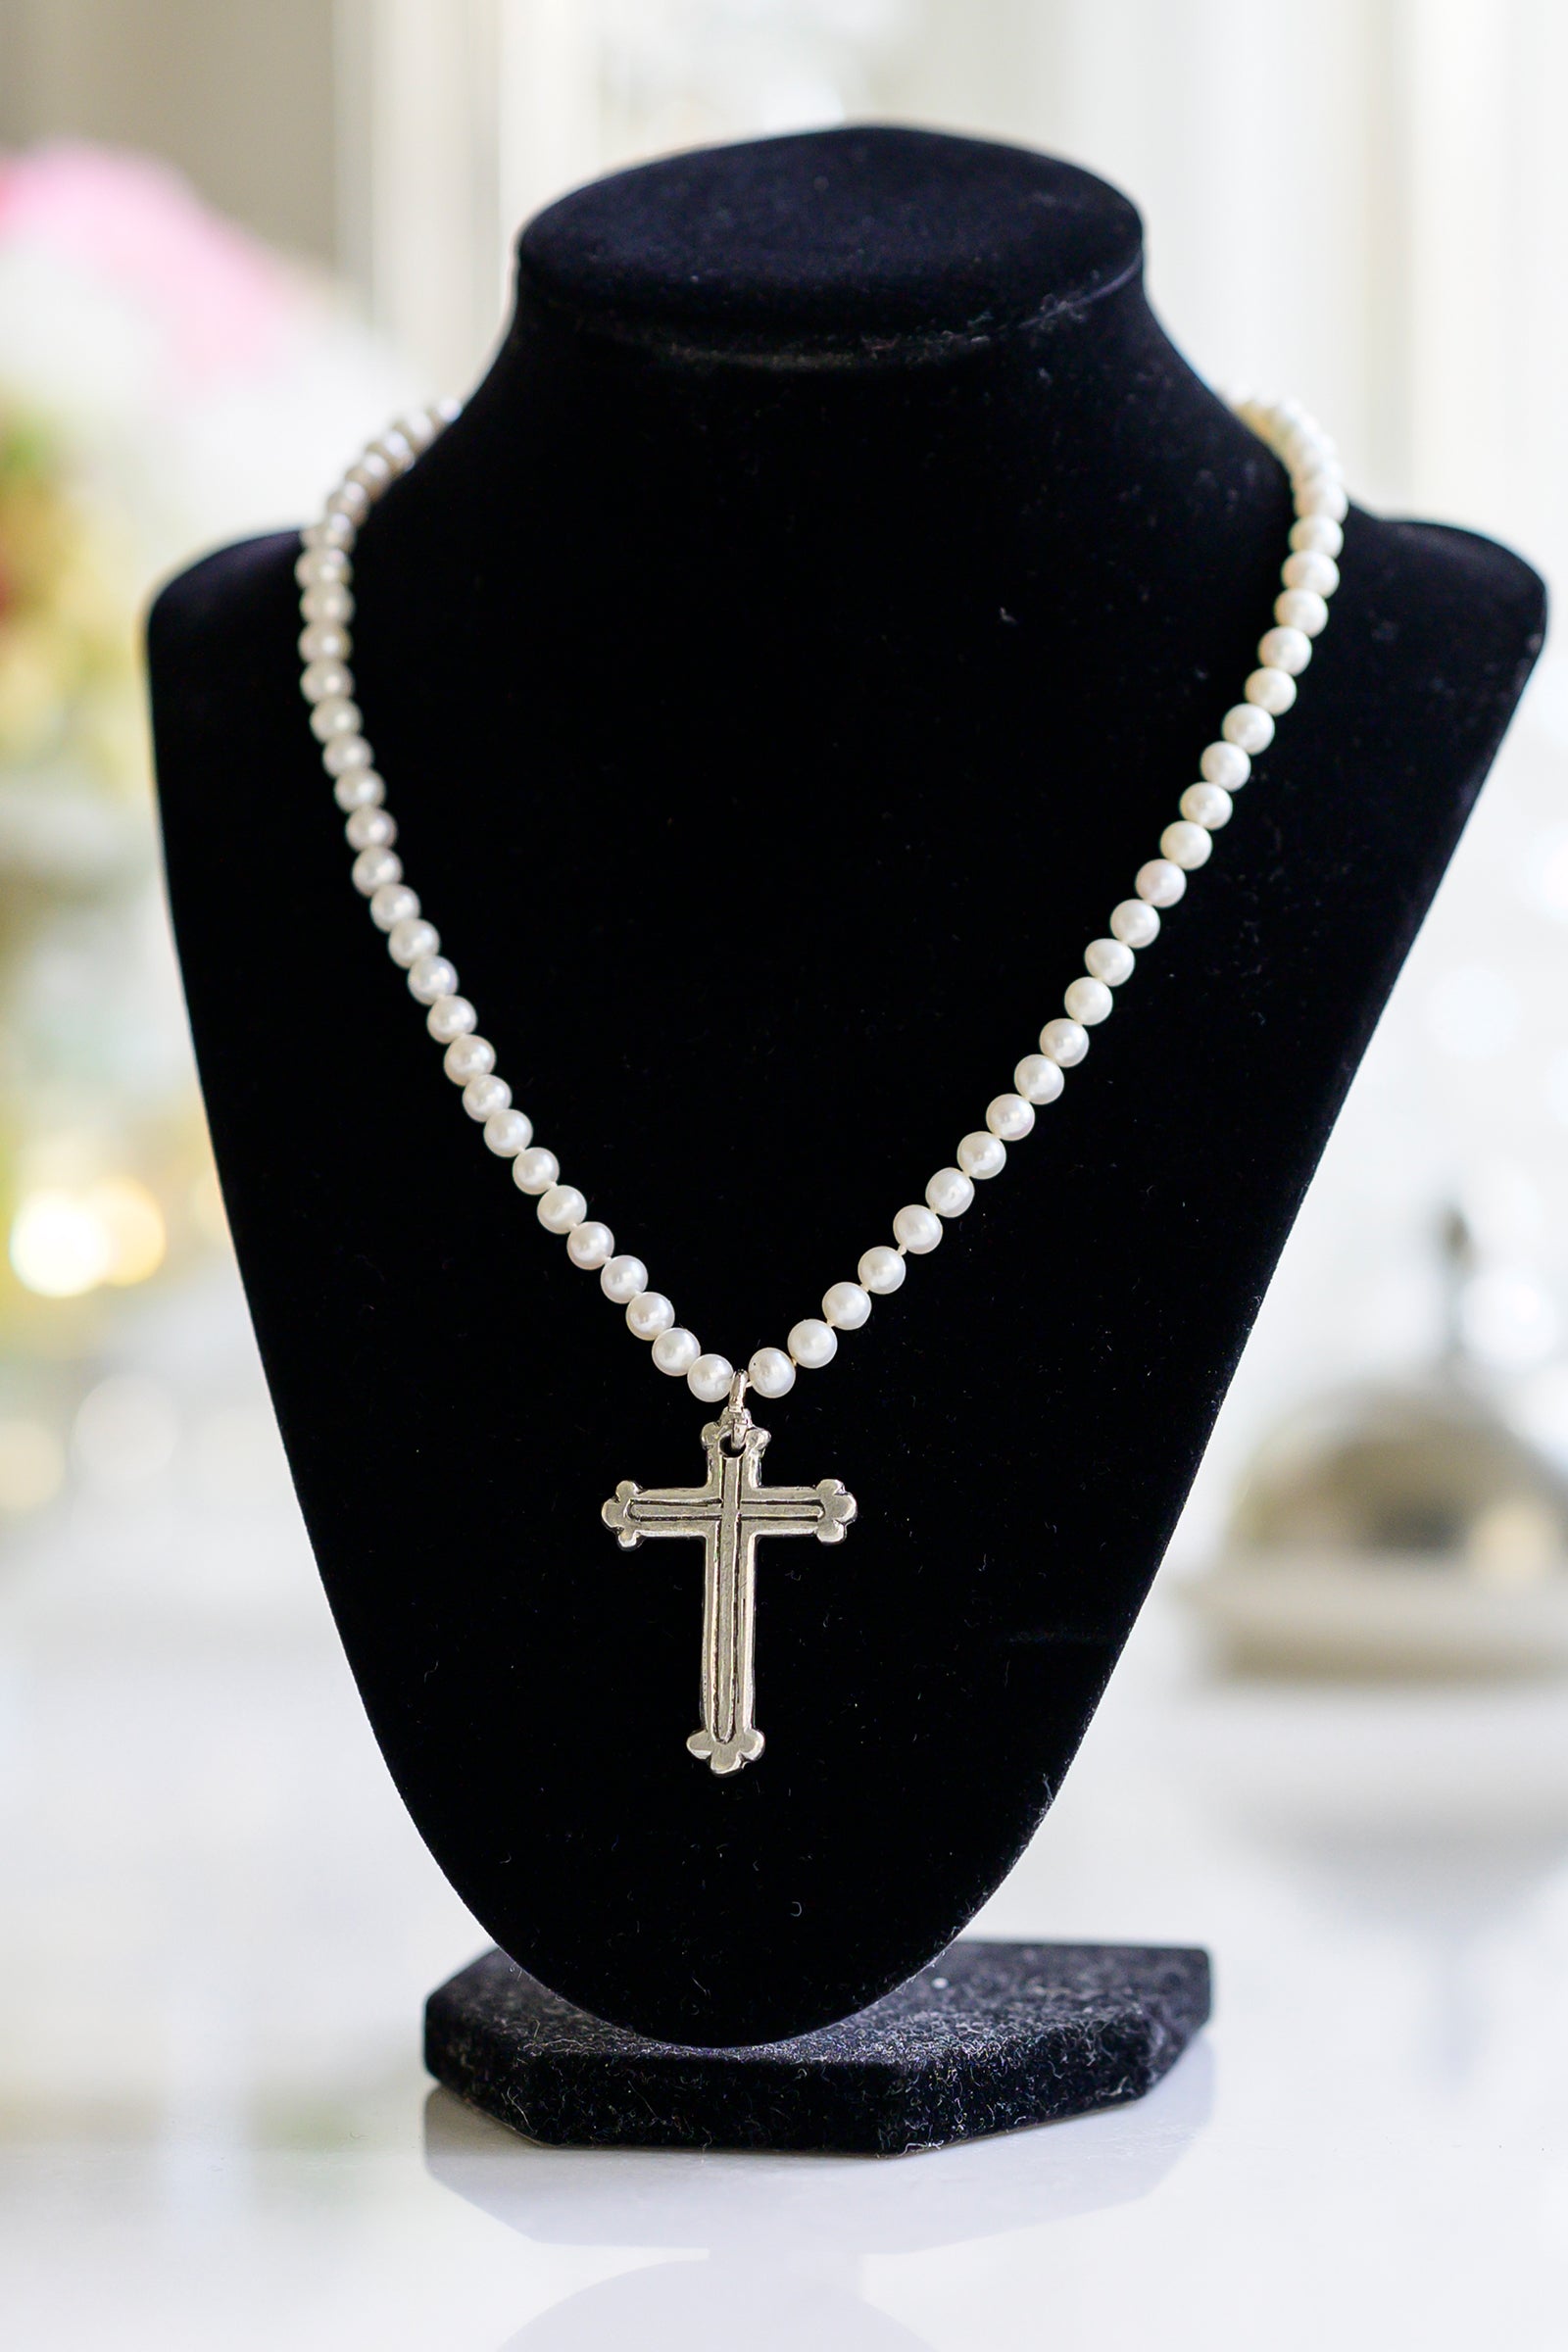 Gold Ankh Cross Necklace - Pres